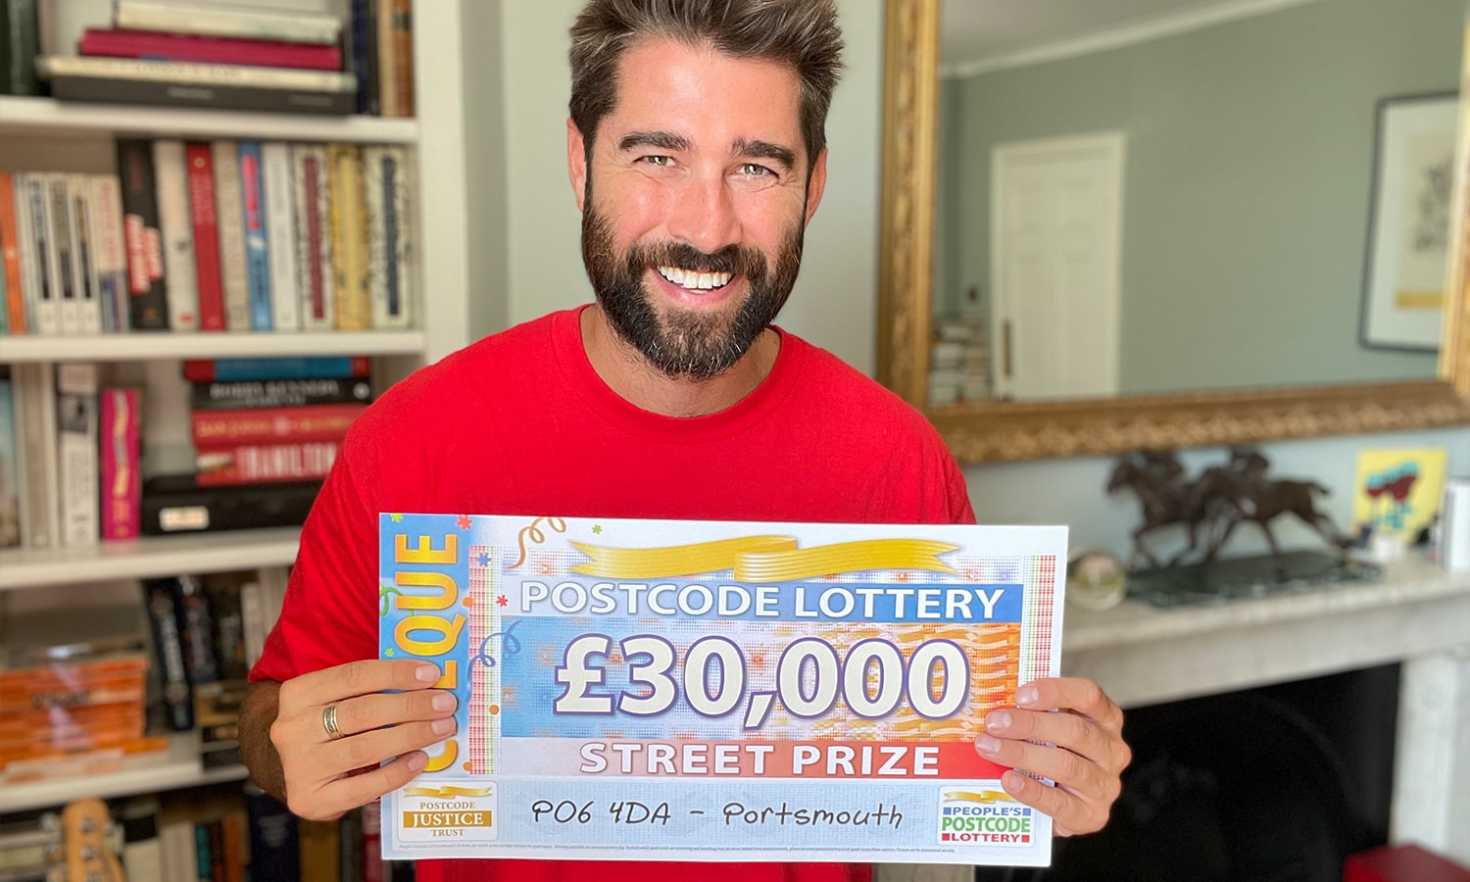 Today's £30,000 Street Prizes are heading to six lucky neighbours in Portsmouth